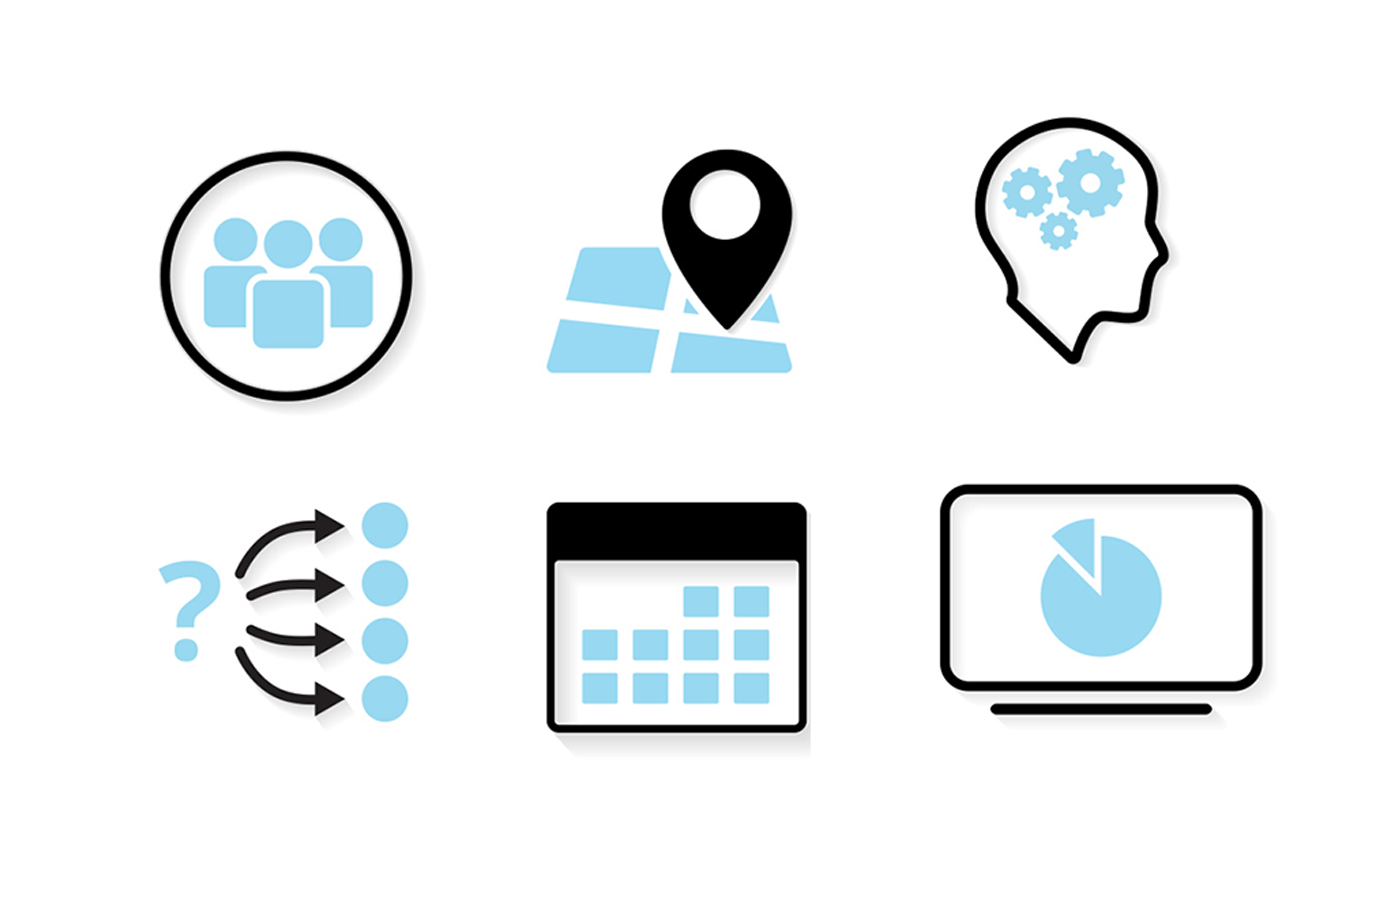 Actenum icons used for infographics and all branding materials.